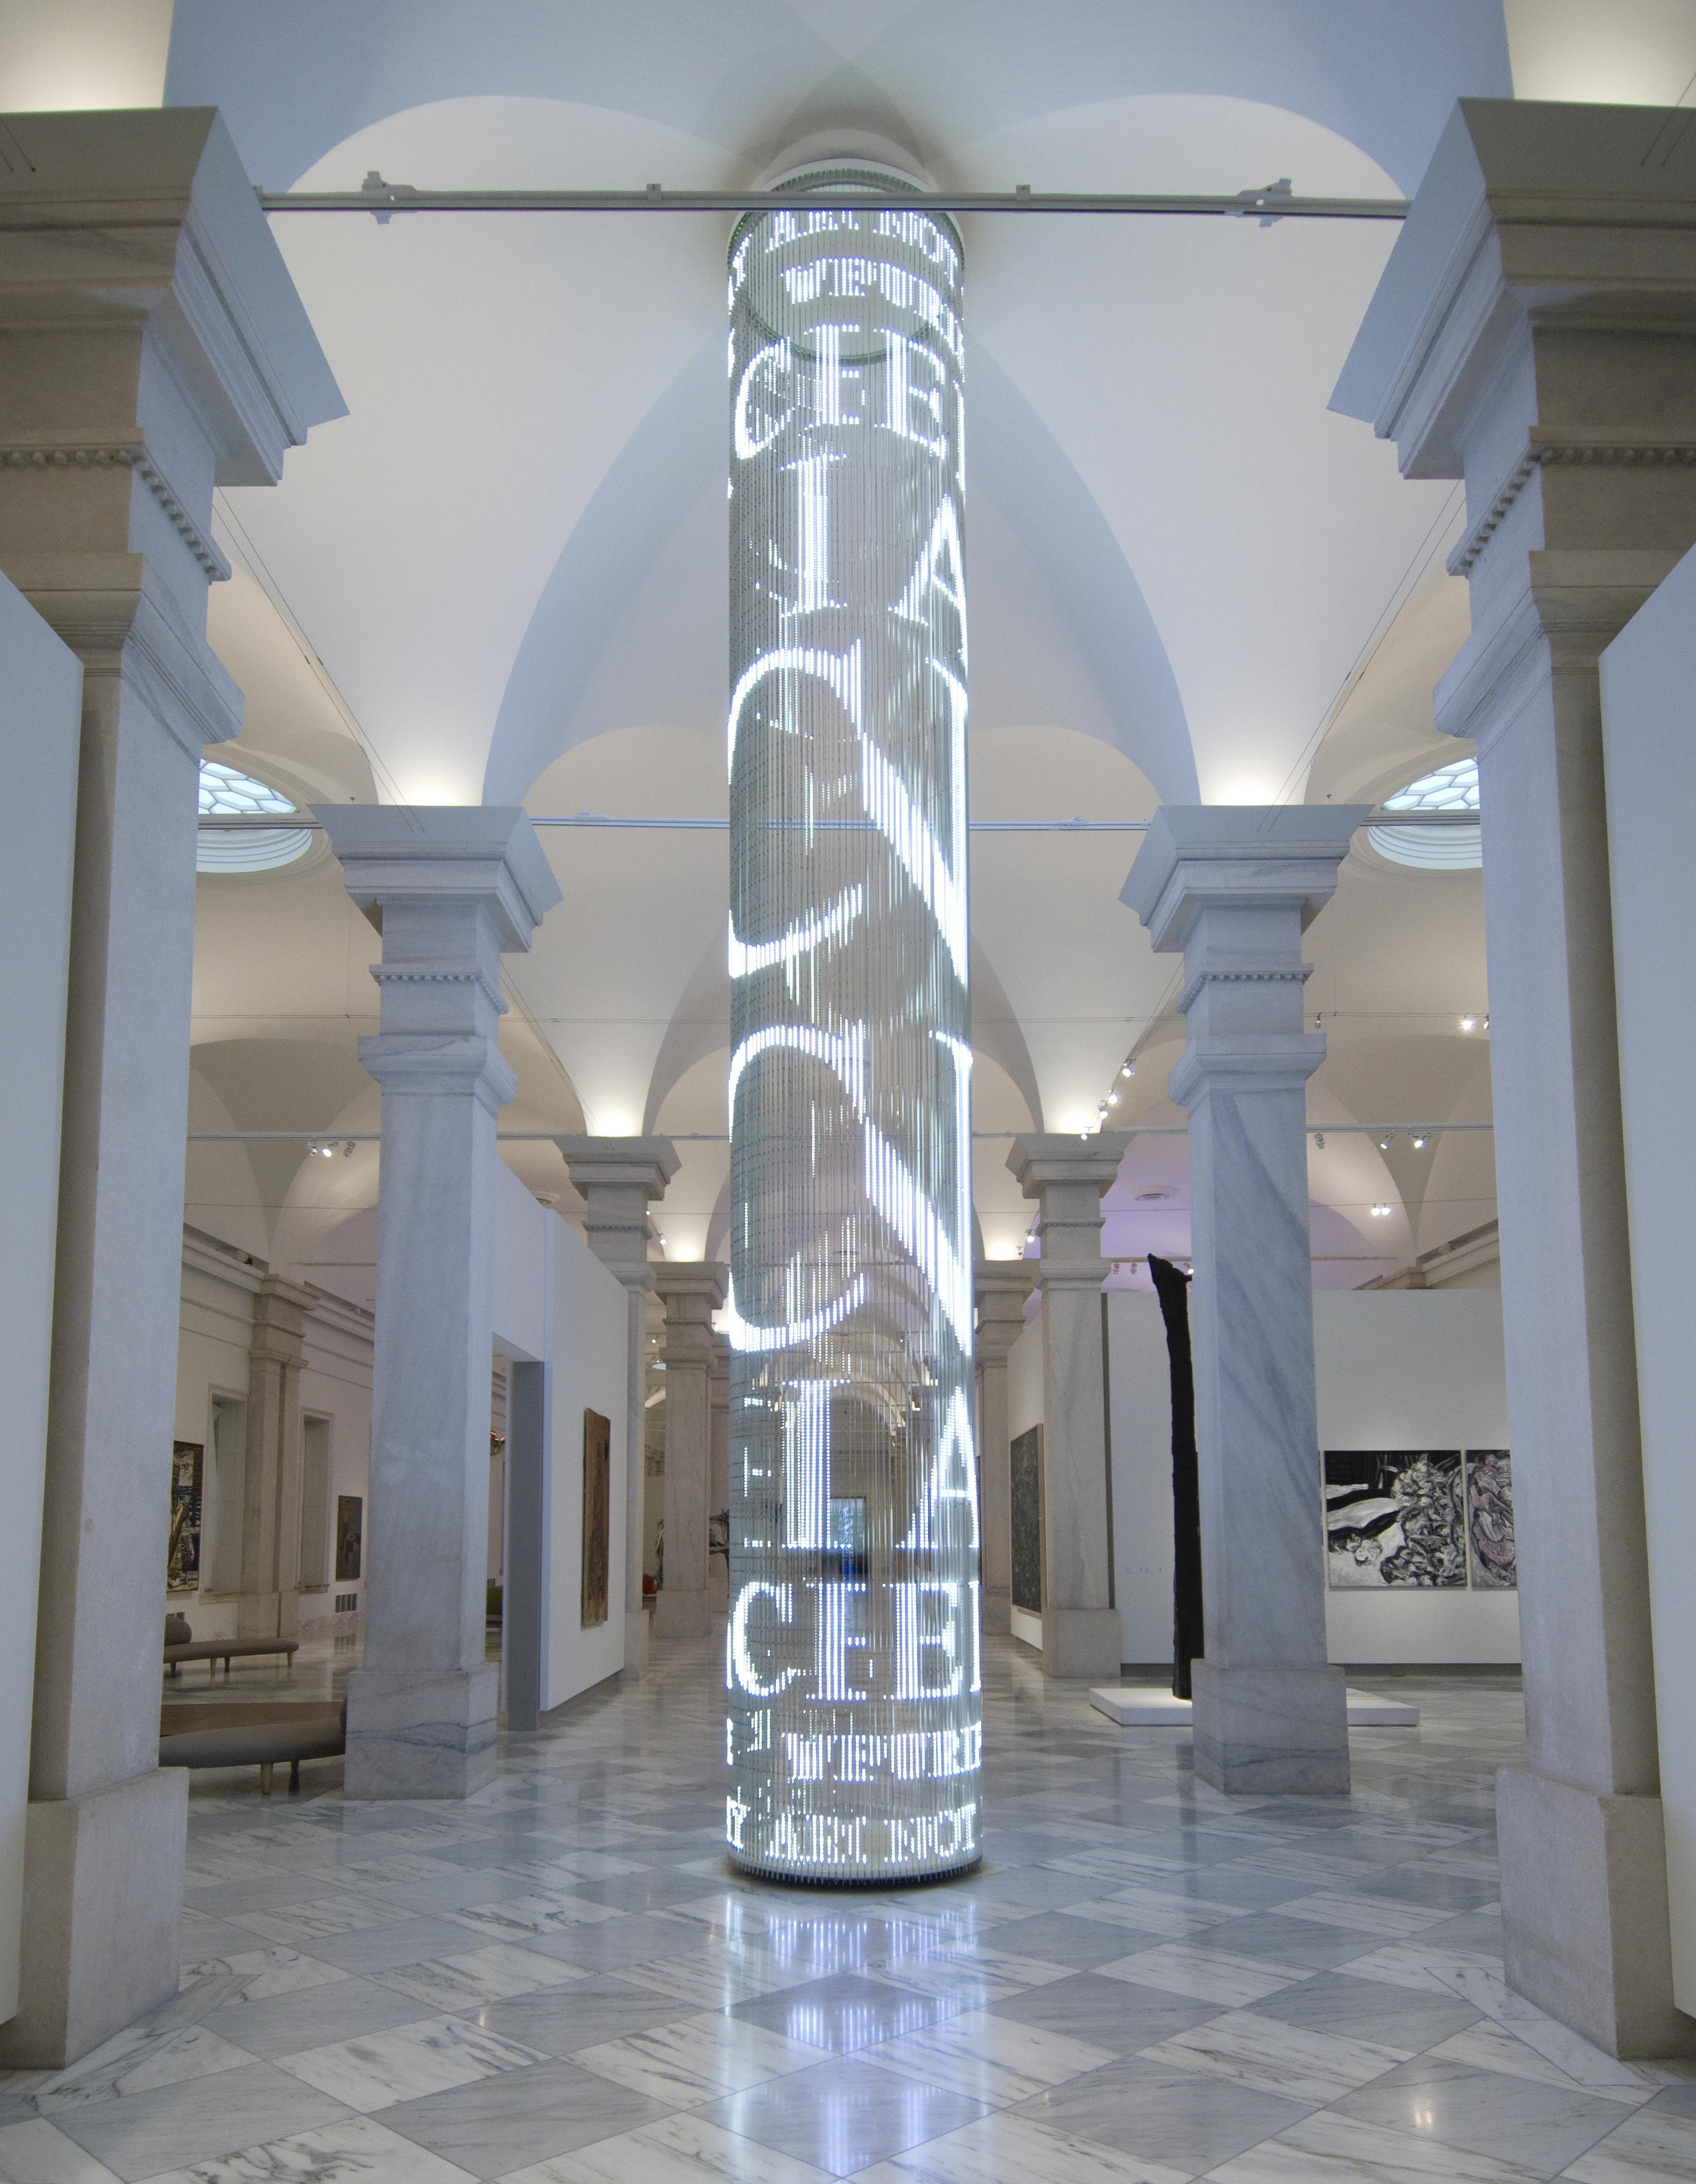 Cylindrical tower of animated LED lights that display the text phrases of the artwork.